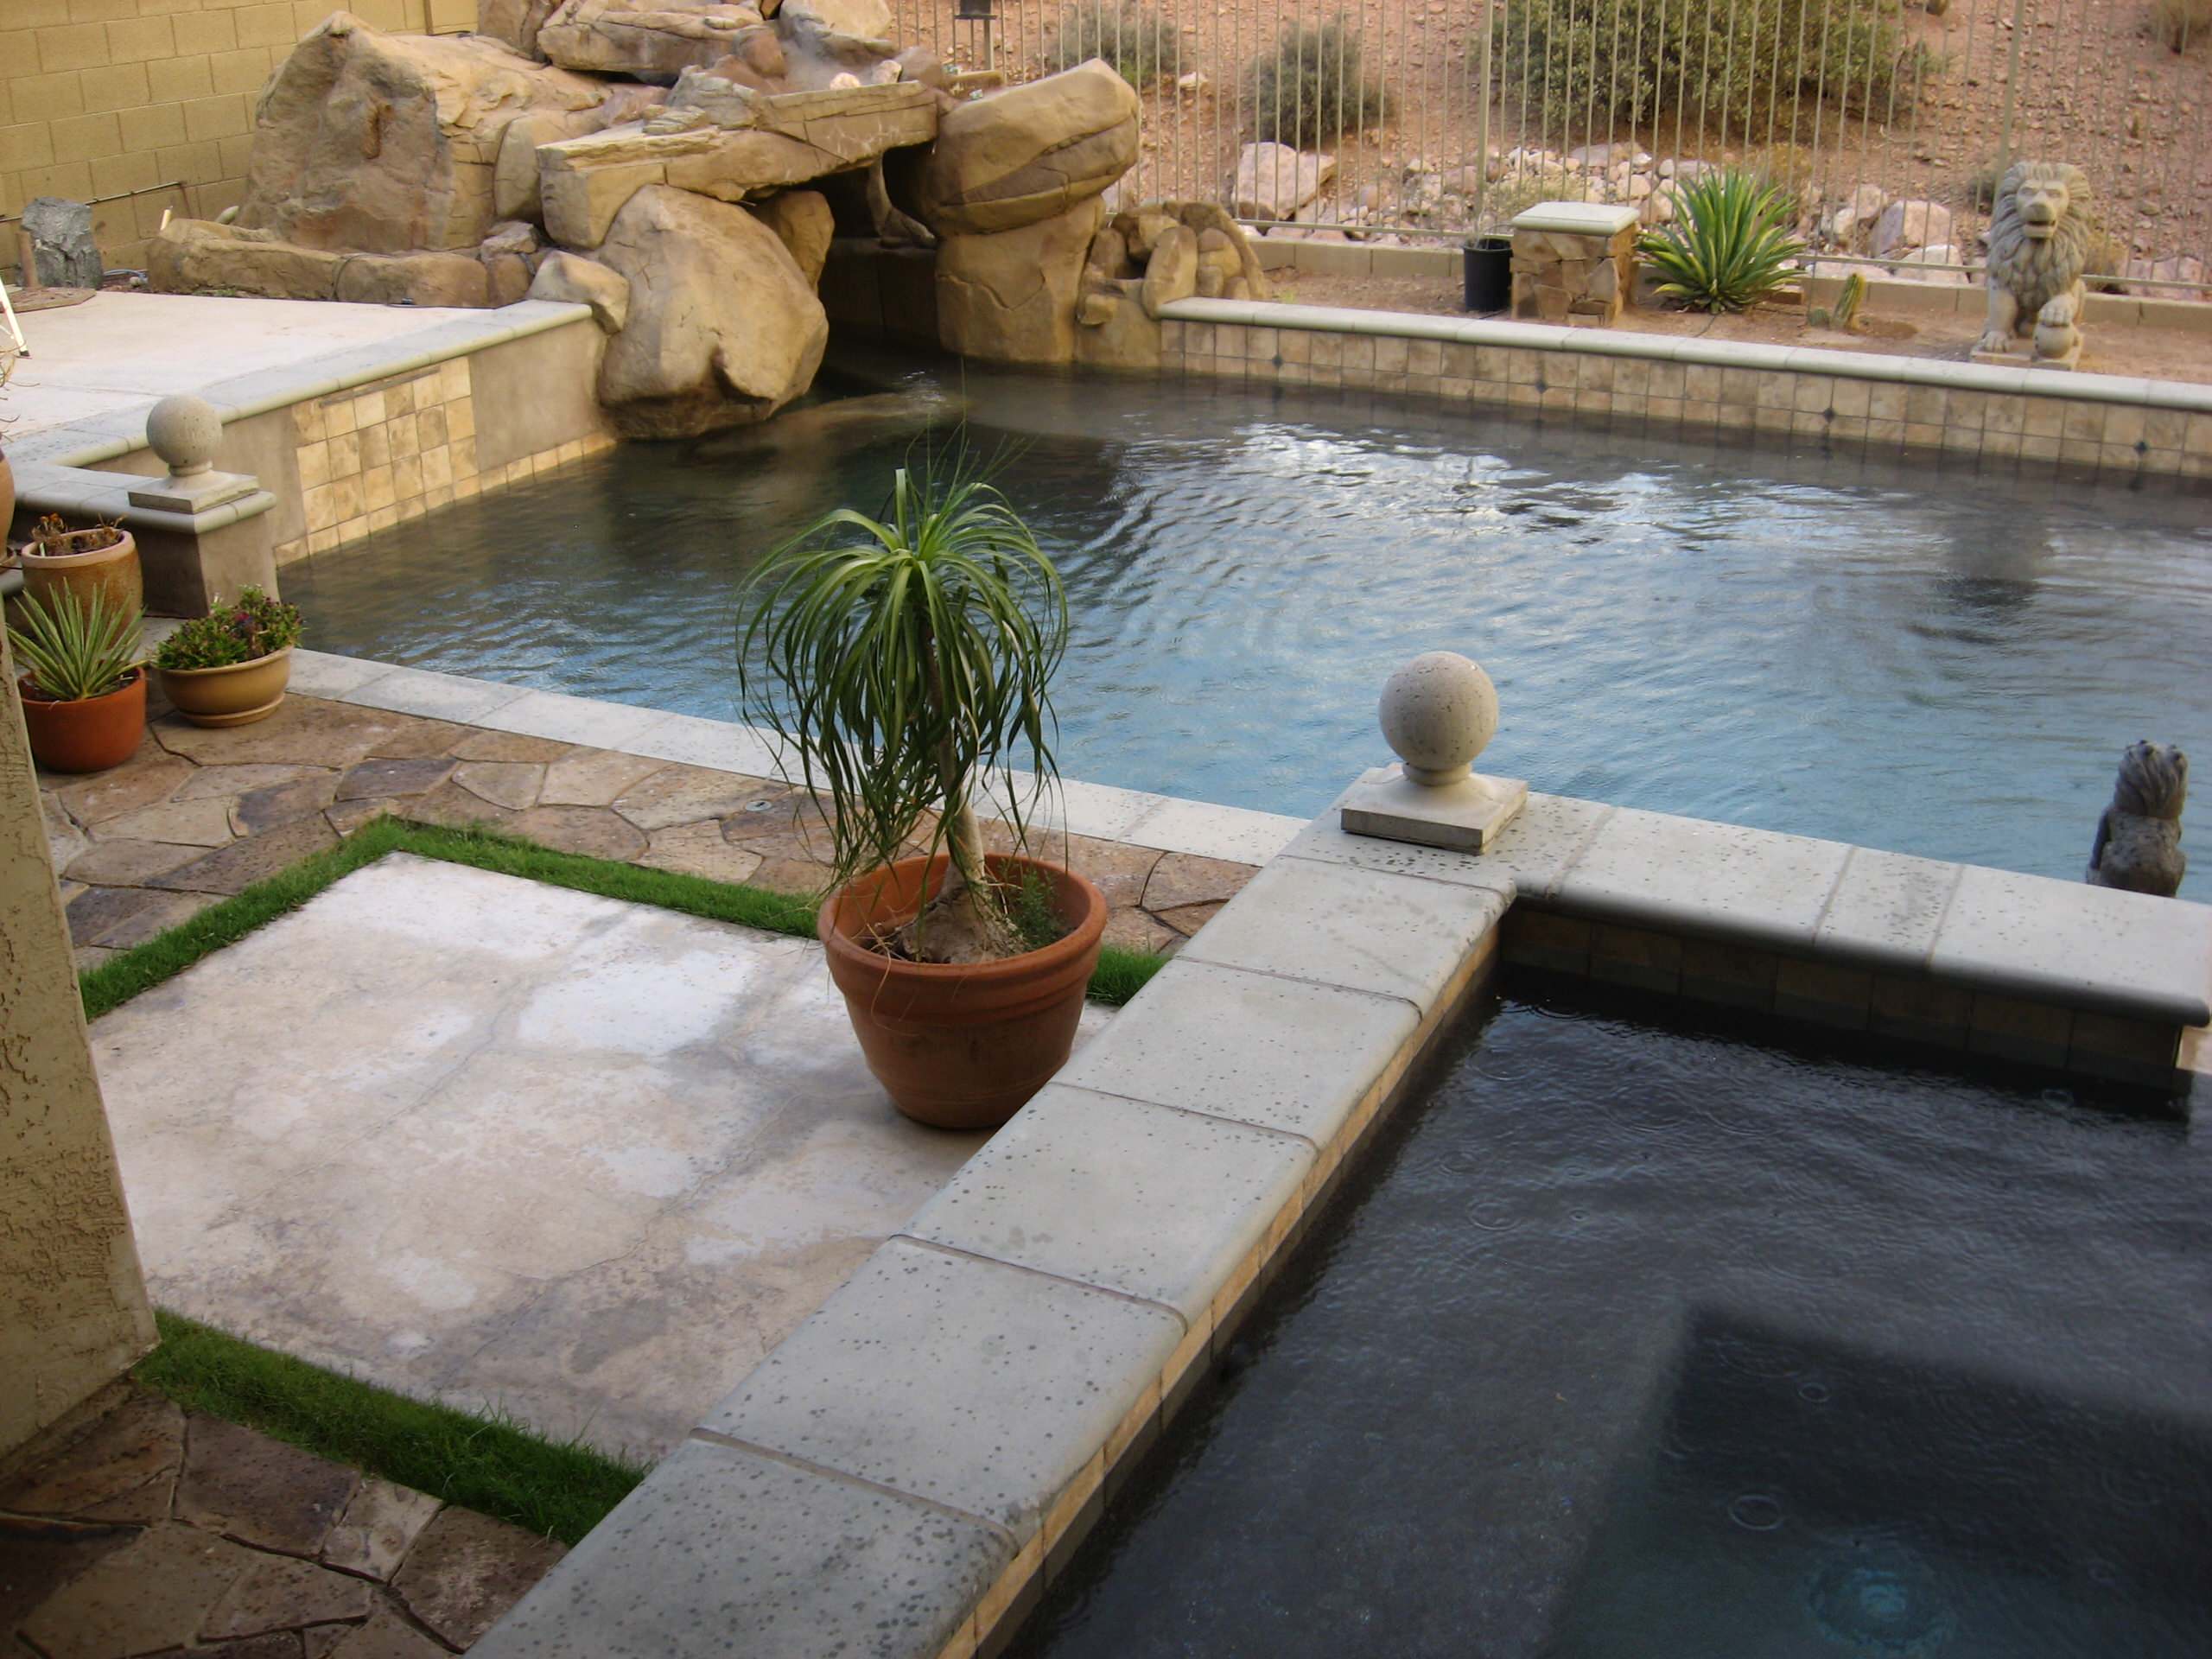 Completed Pool with Rock Cave and Spa for relaxation